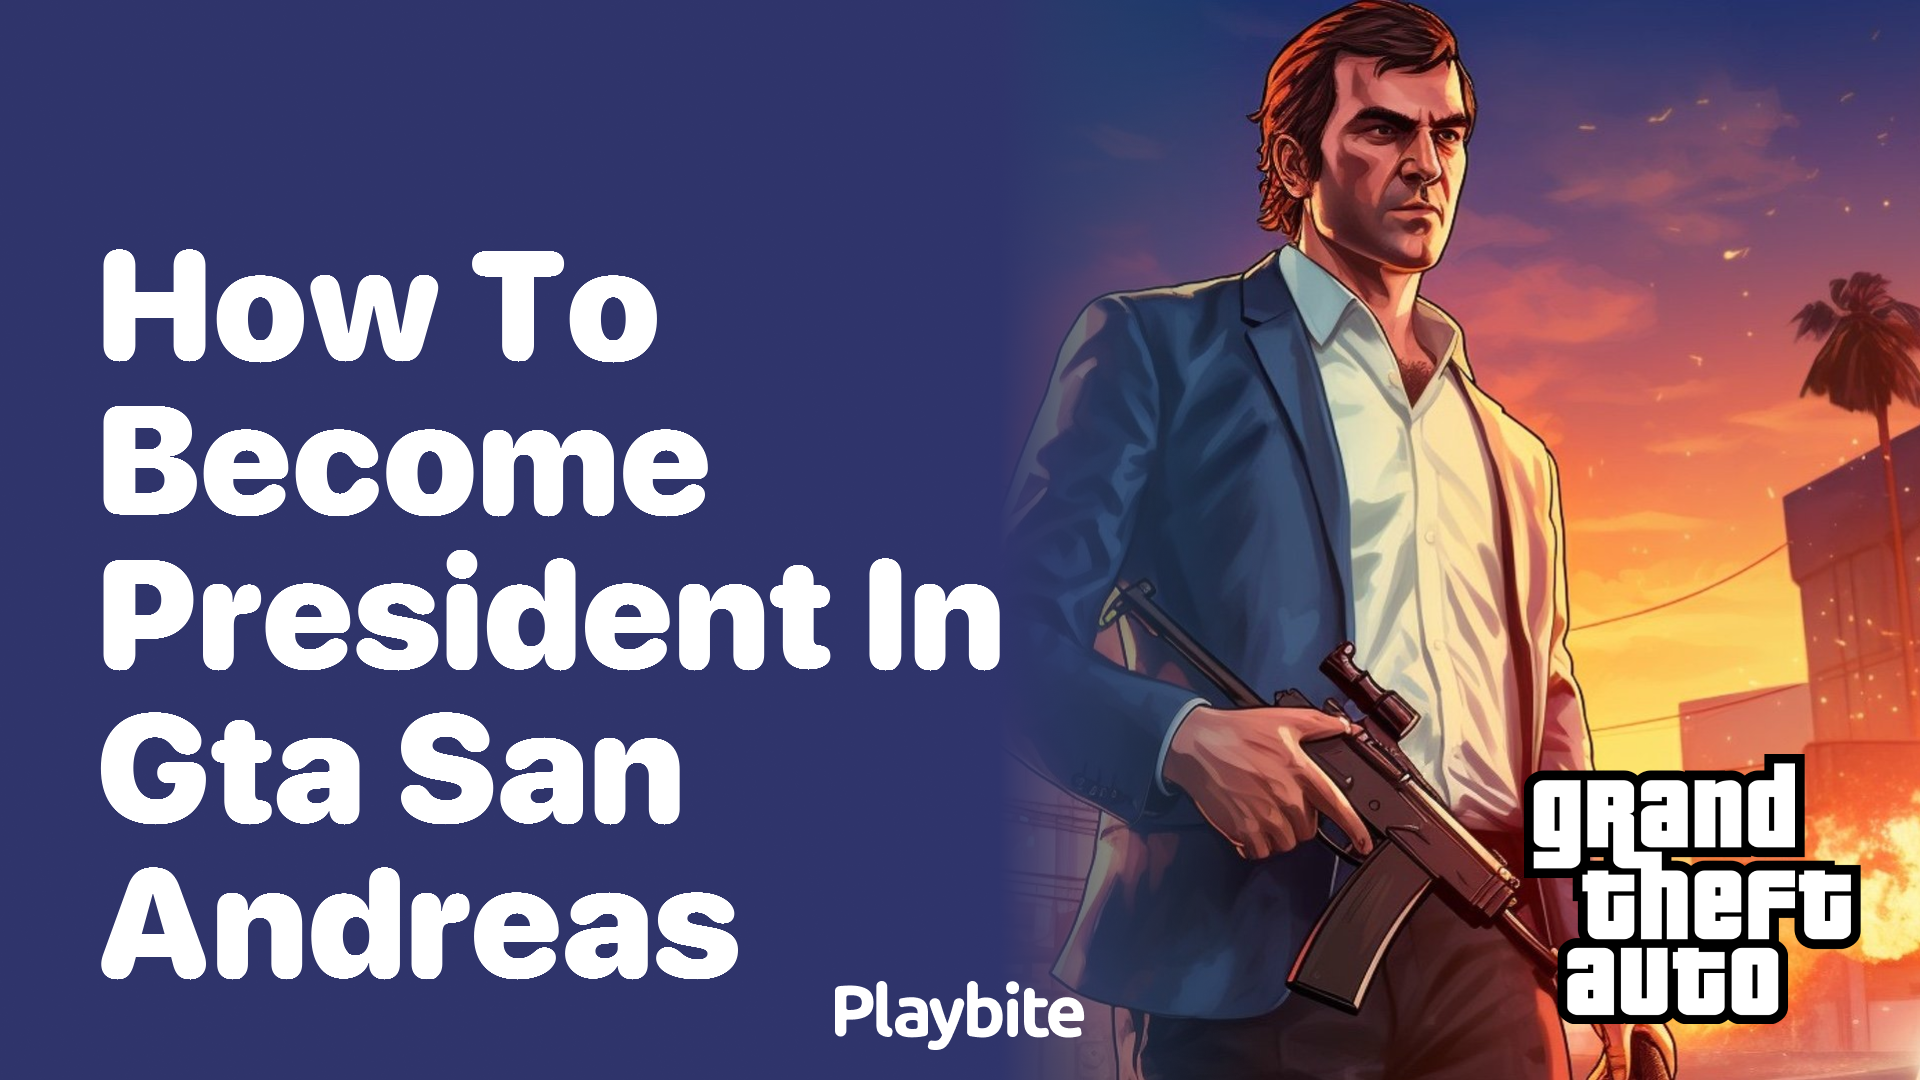 How to become president in GTA San Andreas